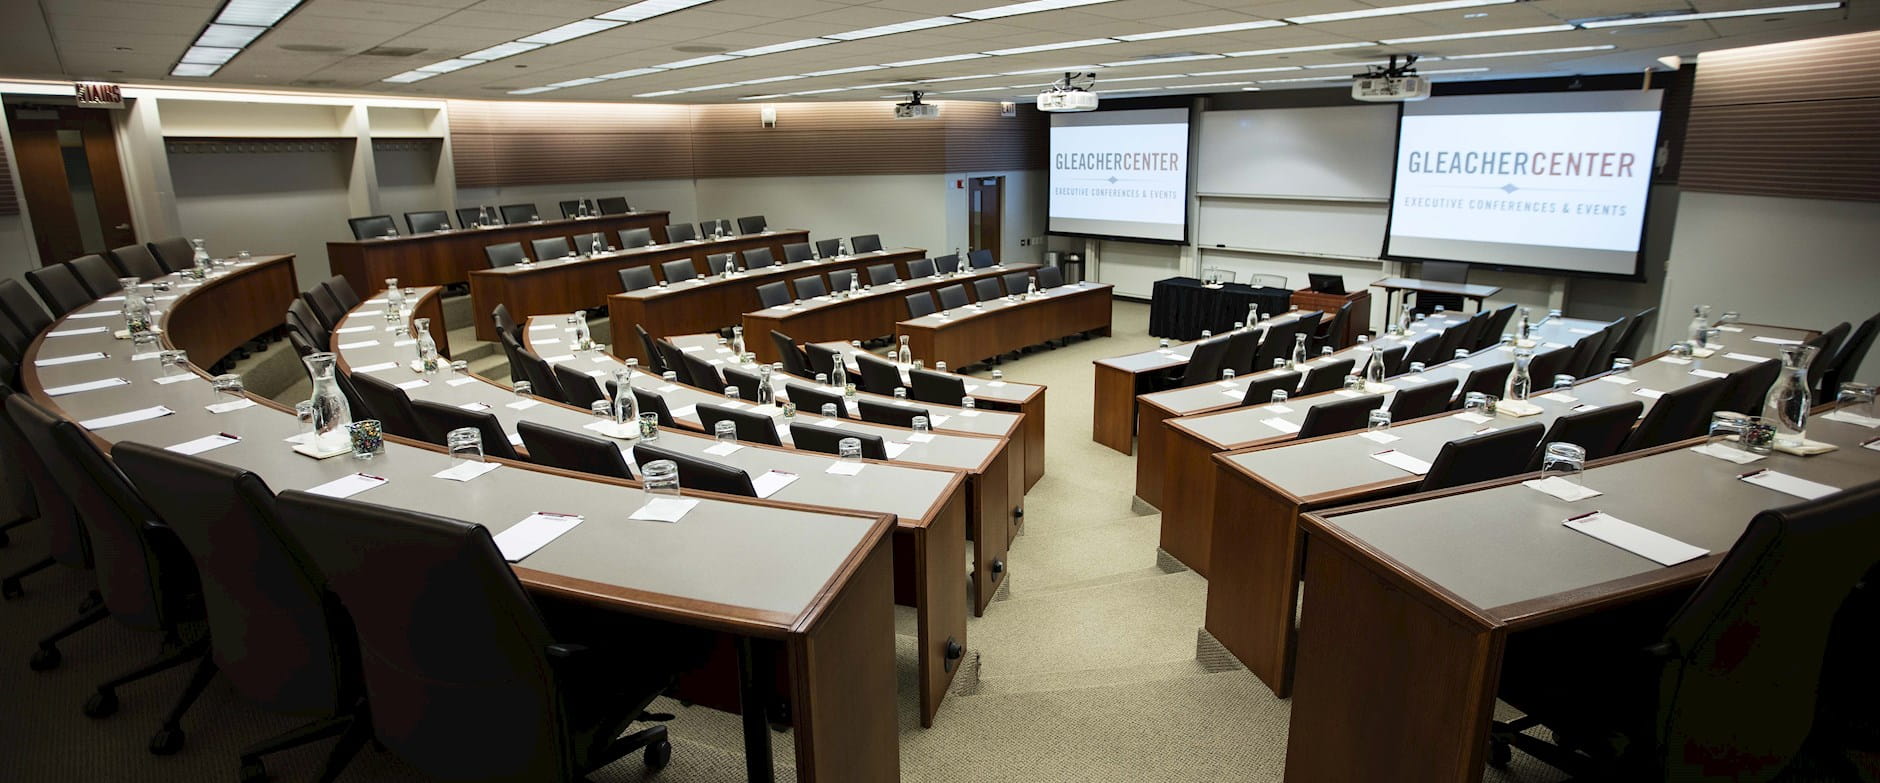 A wide view from the back of room 400 at the Gleacher Center showing tiered tables and chairs in a semi-circle with 2 projector screens at the front